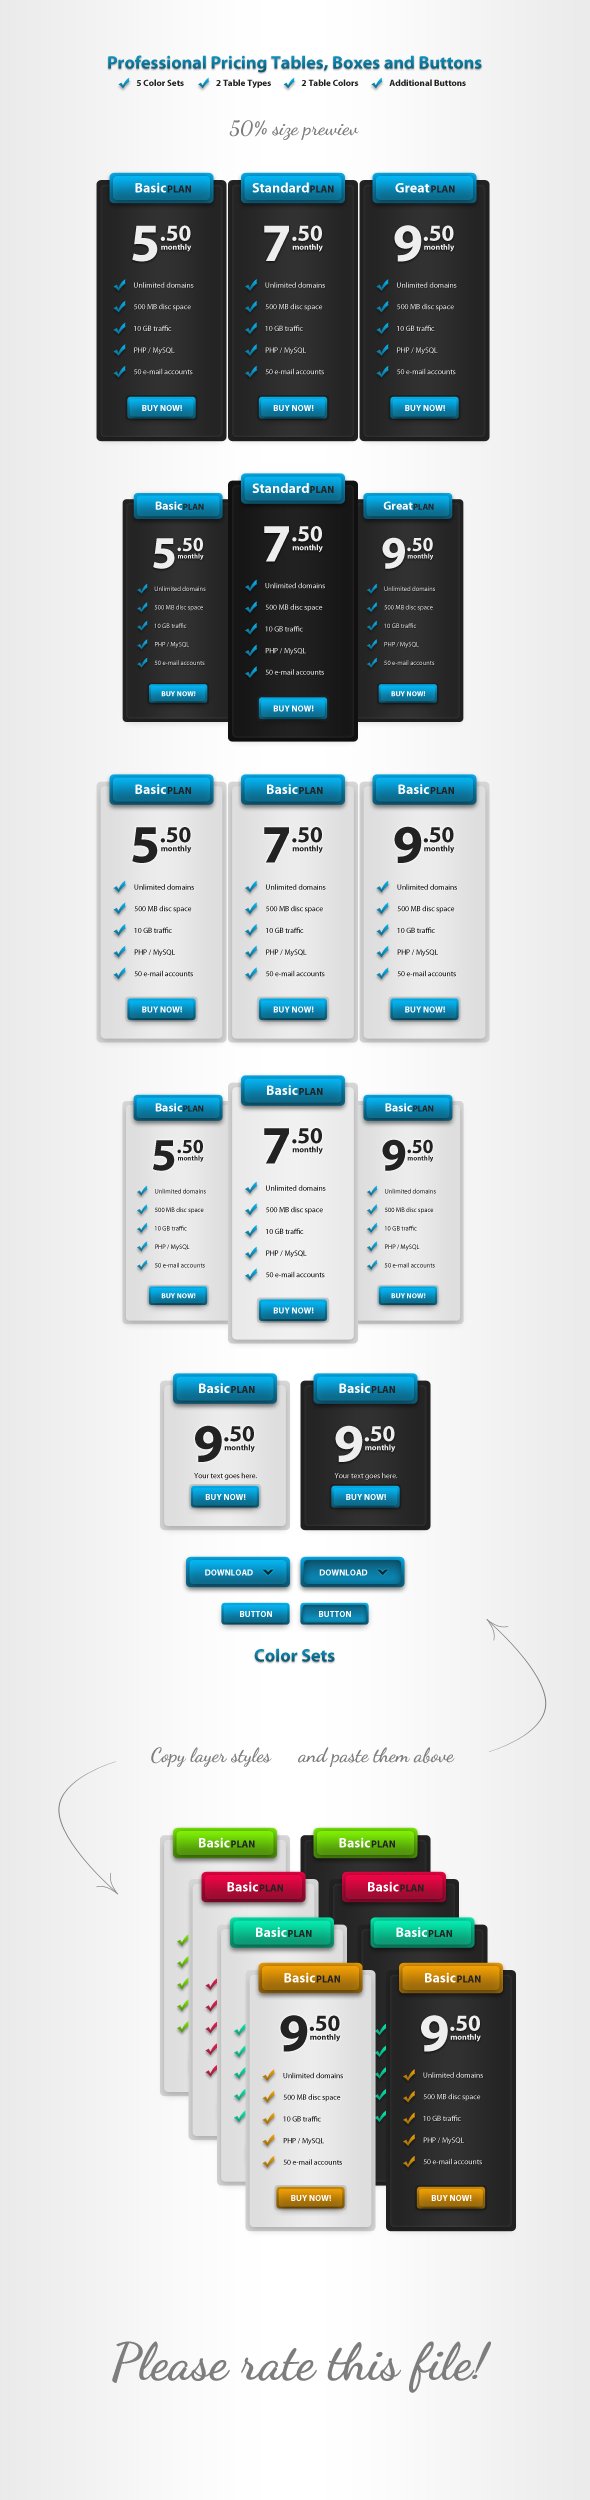 Professional Pricing Plans preview image.